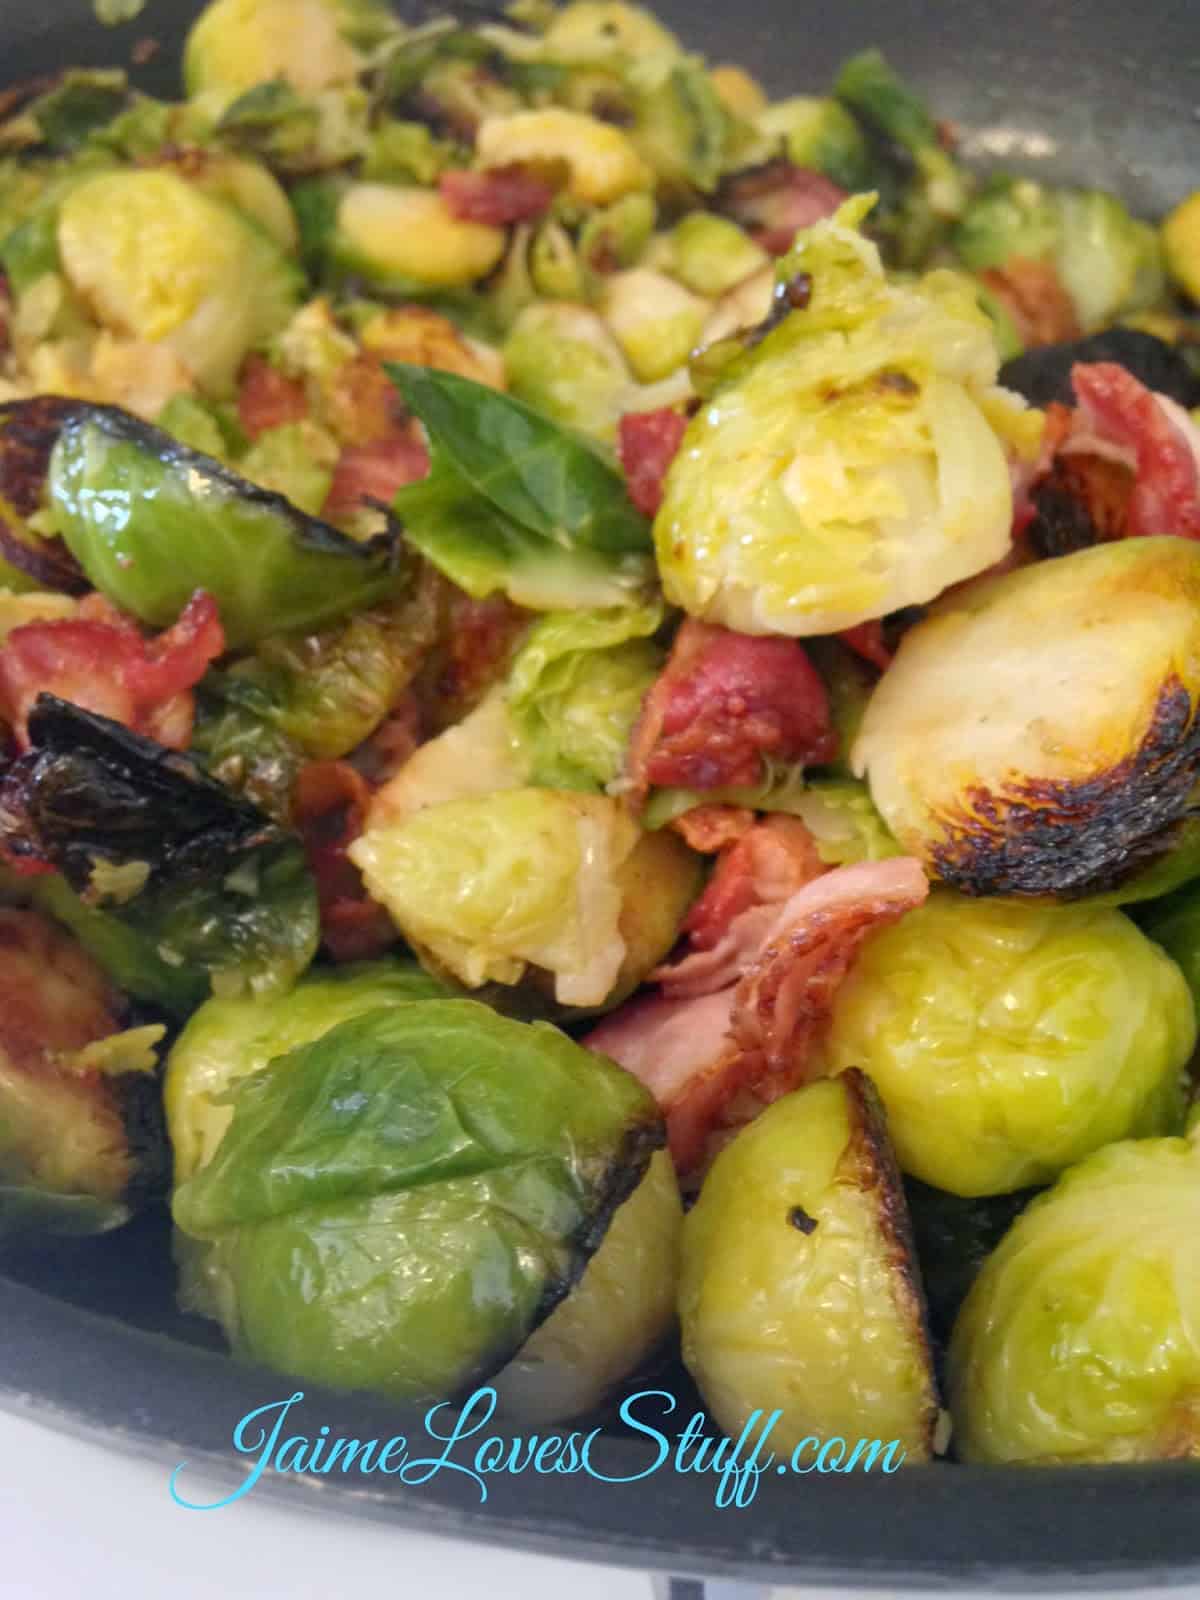 Thanksgiving Side Dishes - Bacon and Brussel Sprouts